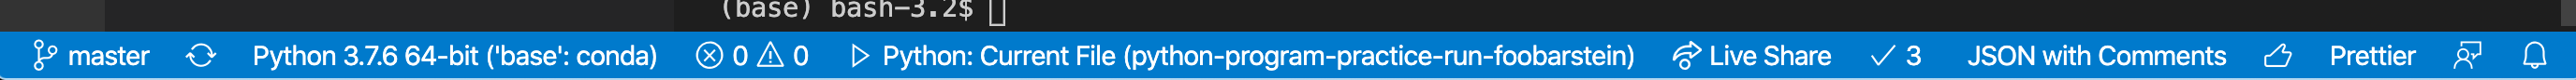 Visual Studio Code's status bar... notice the checkmark indicating
the tests
passed